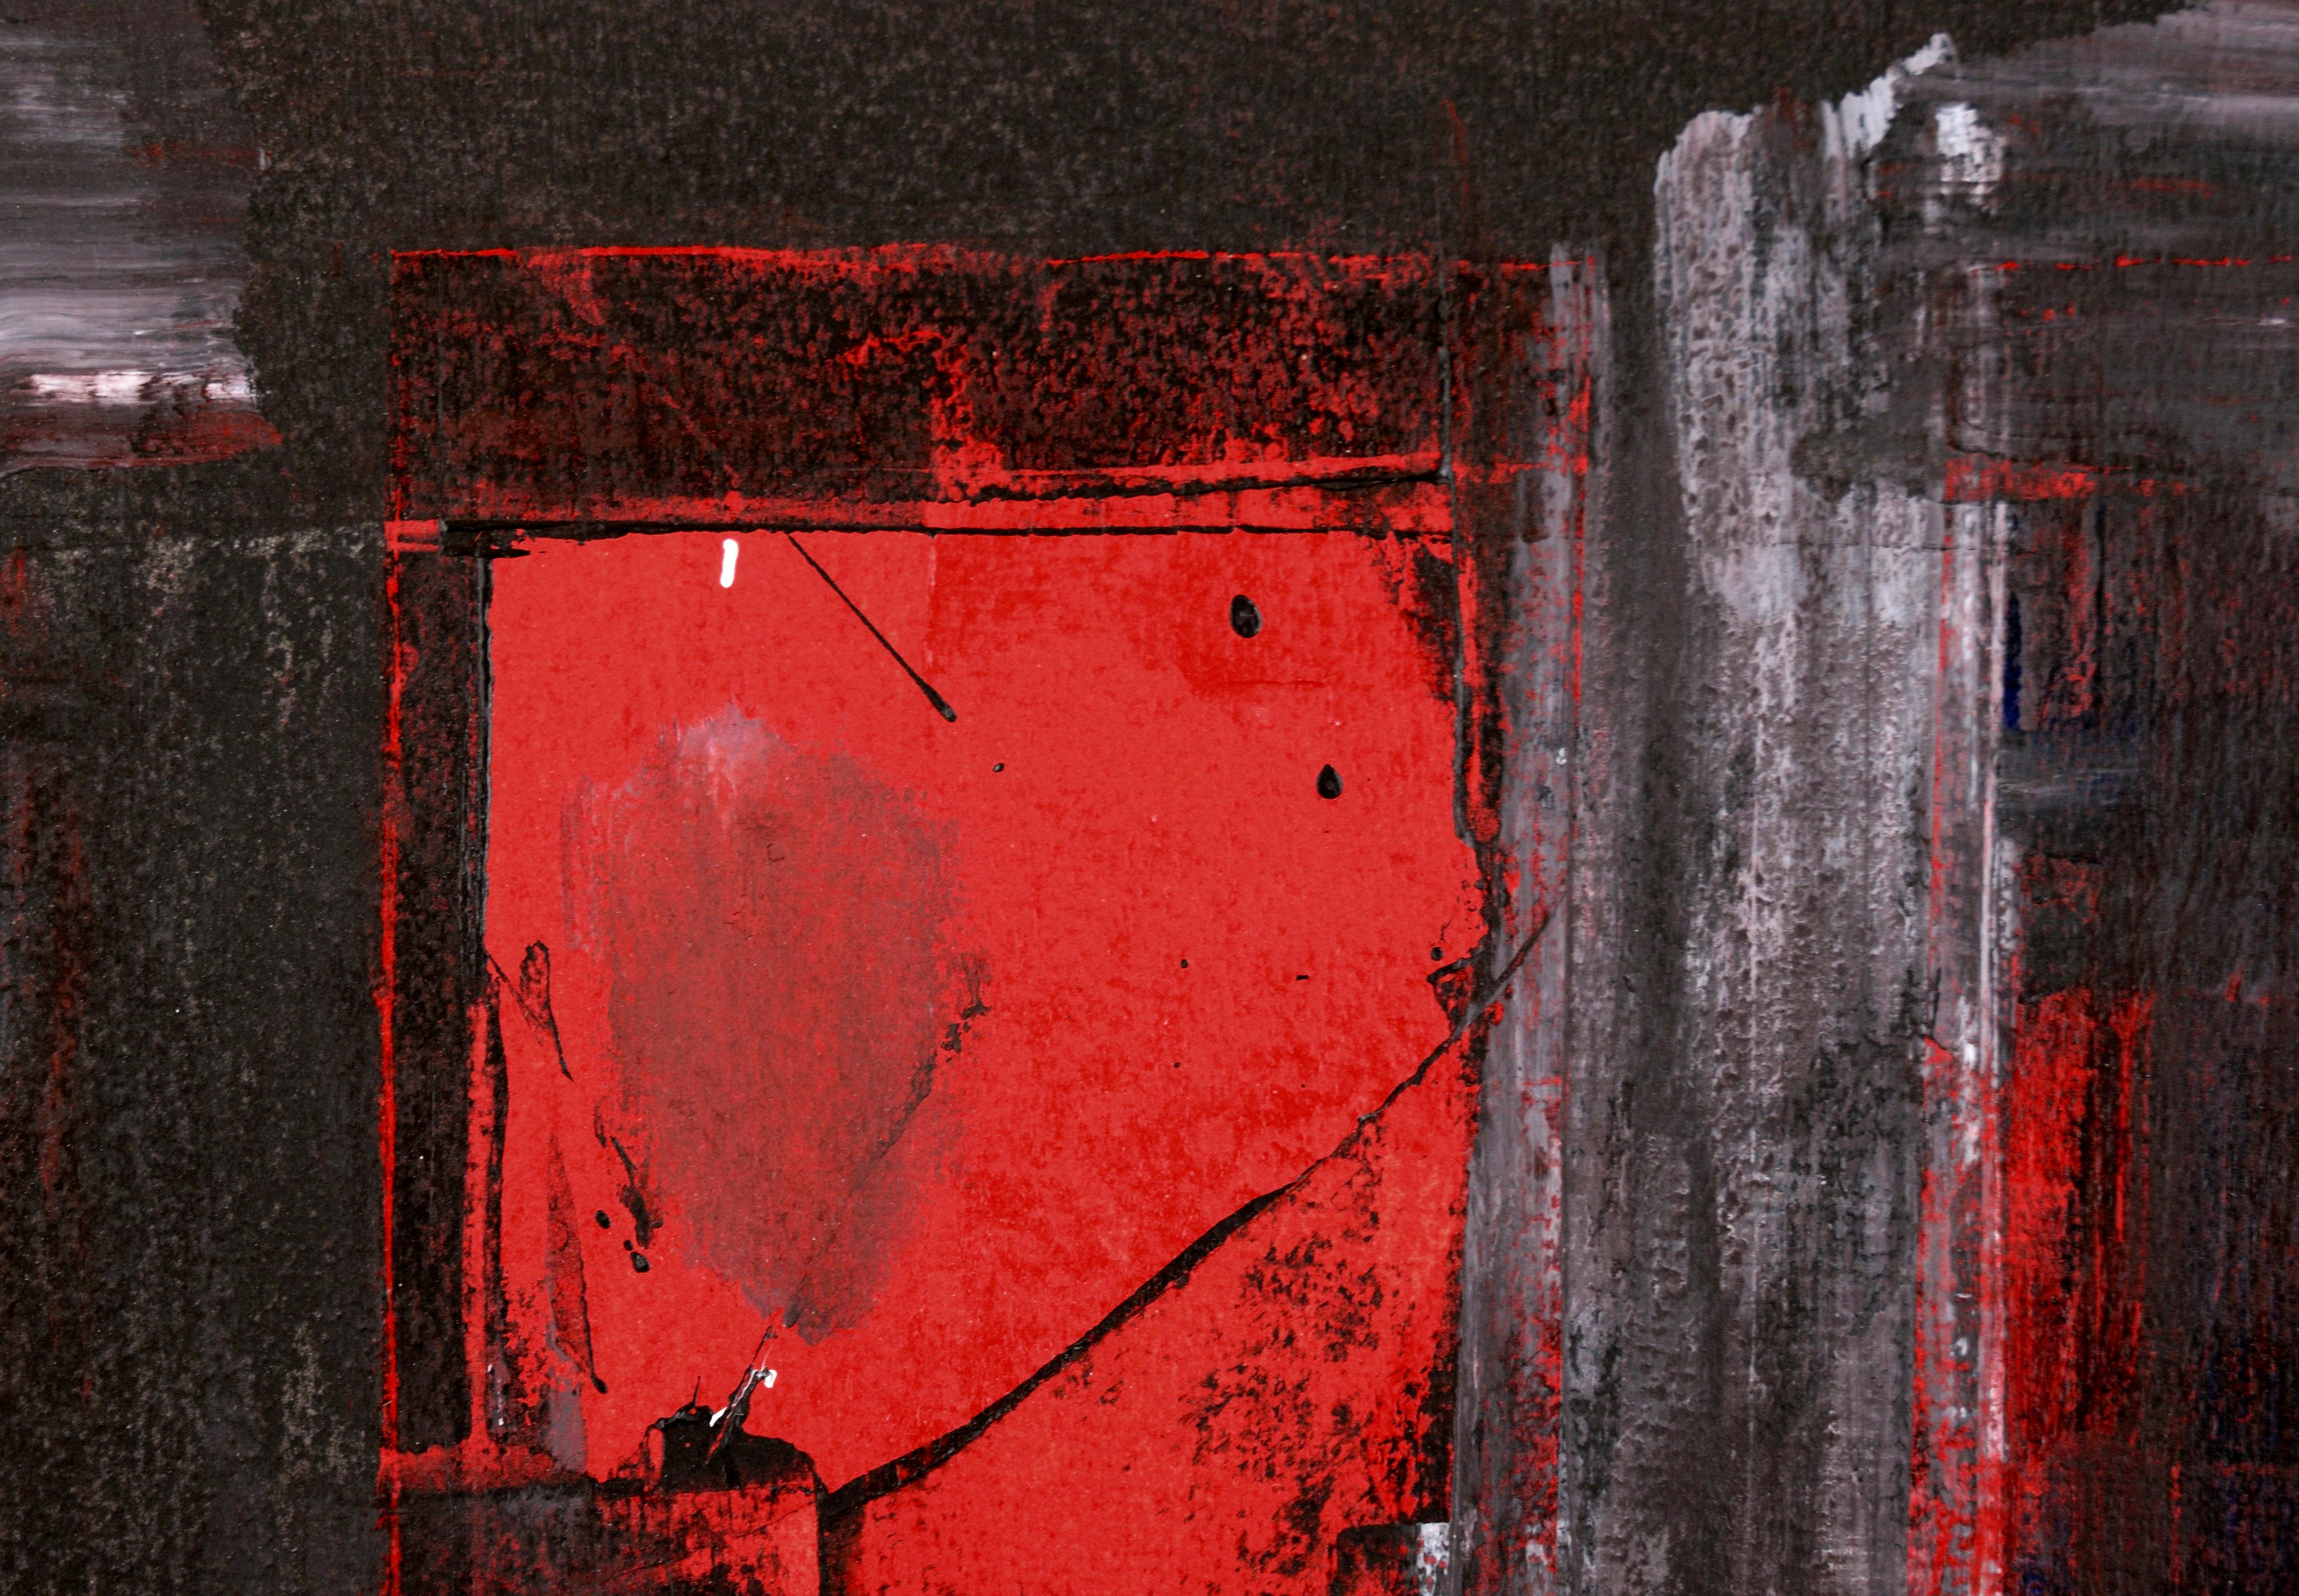 Red Portal Abstract Impressionist Composition in Acrylic on Heavy Arches Paper - Painting by Ricardo de Silva